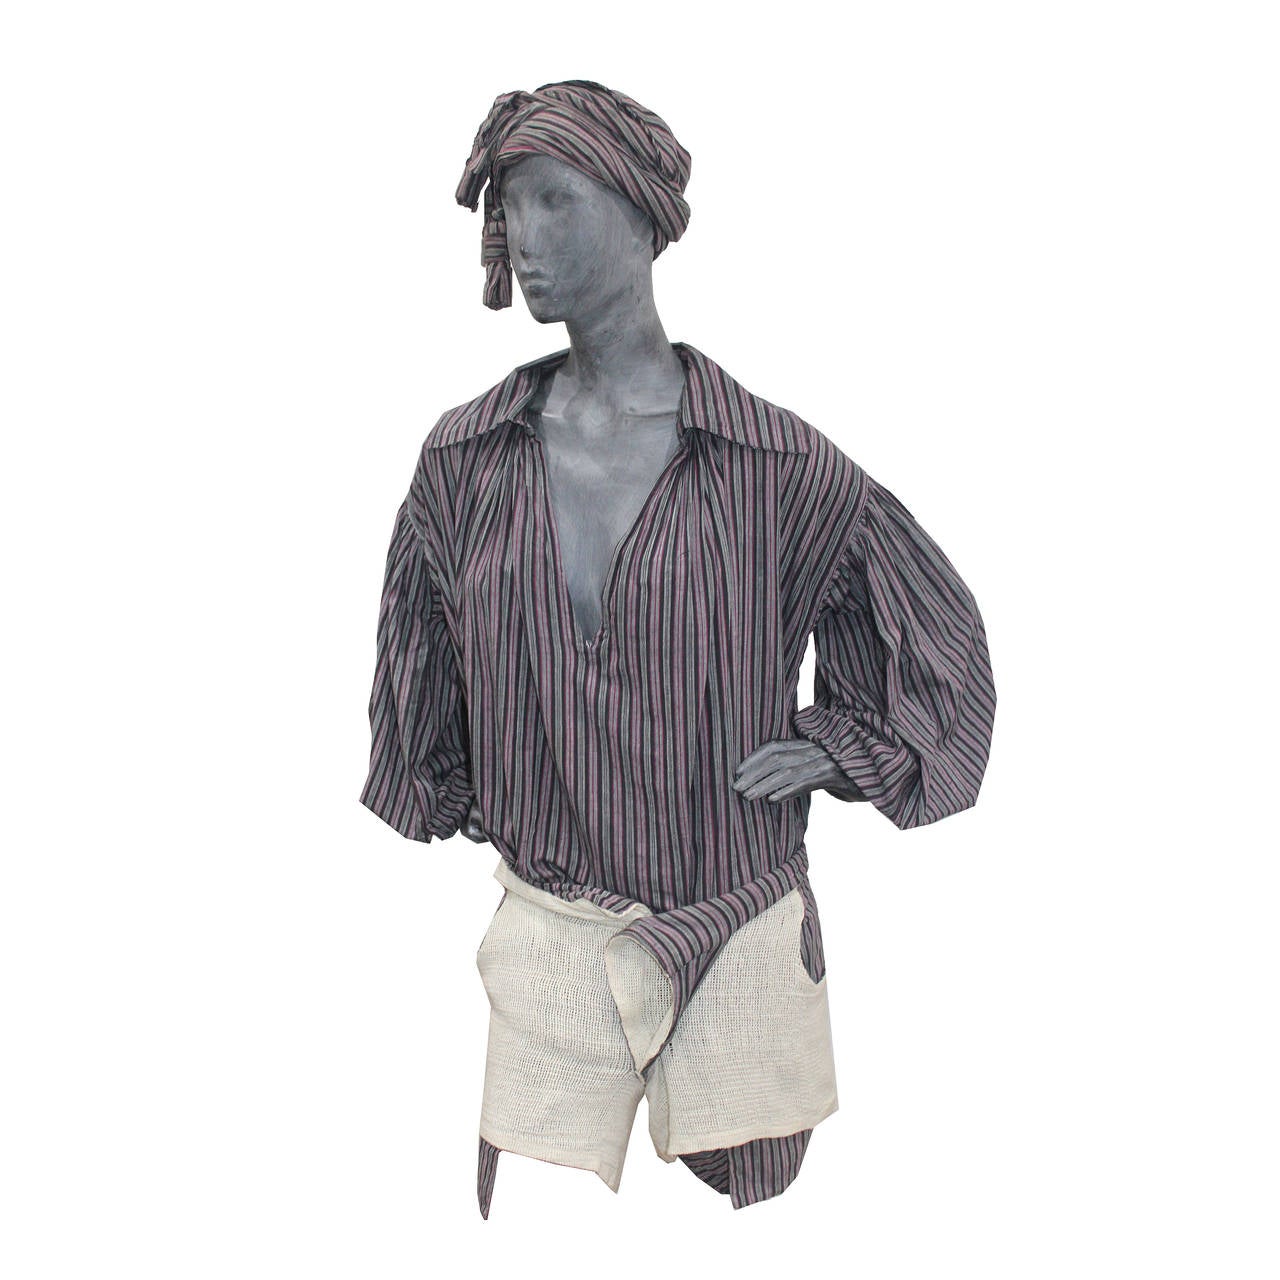 A Fine and rare World's End pirate ensemble from Vivienne Westwood and Malcolm McLaren's first catwalk show. Made of 100% Cotton. The ensemble features an oversized pirate shirt, mini shorts and a tasseled sash which can be be styled in various